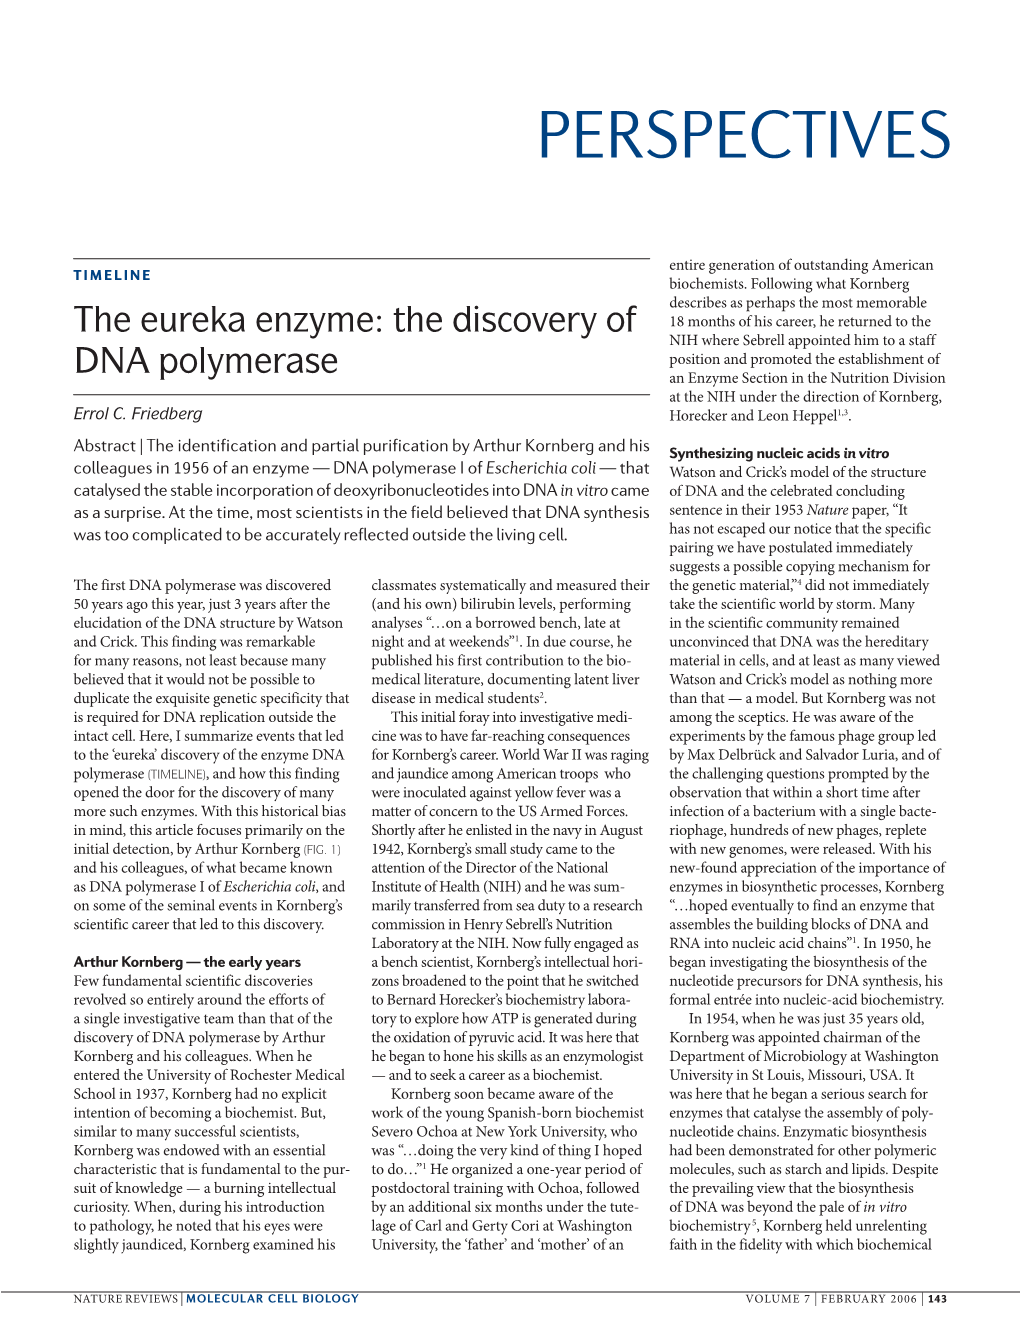 Discovery of DNA Polymerase I